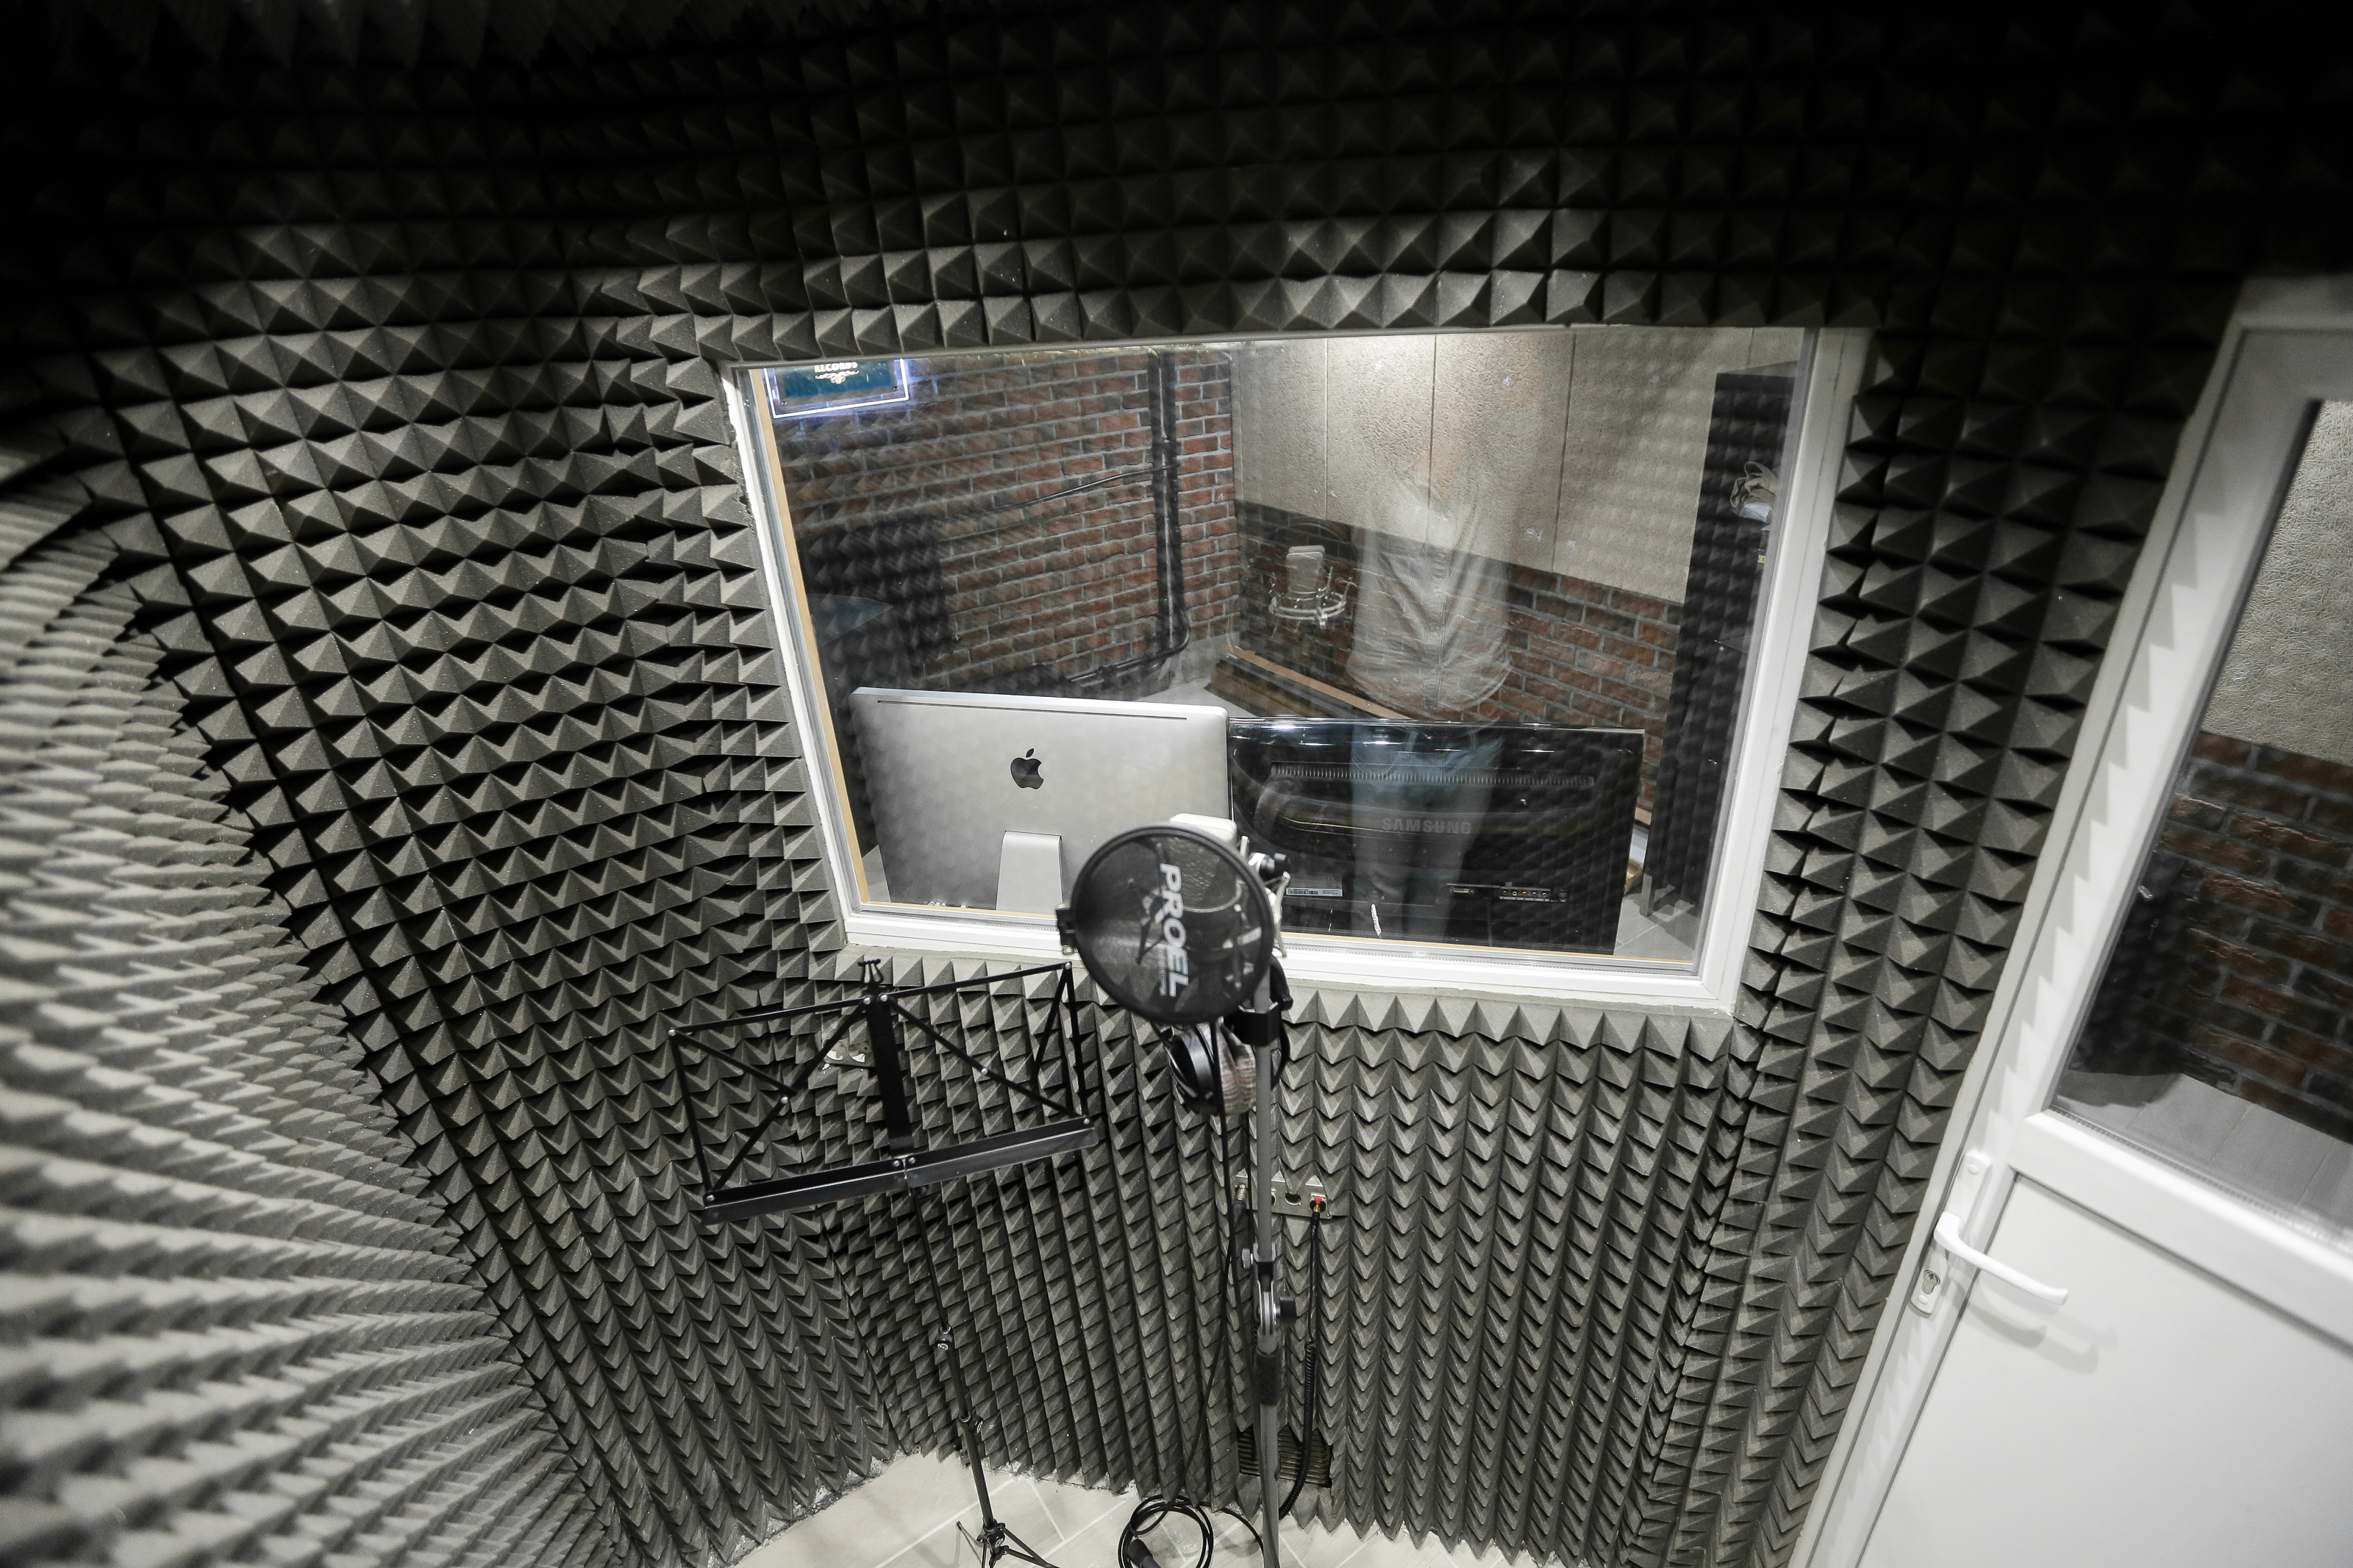 Soundproof booth (vocal booth) what is it?